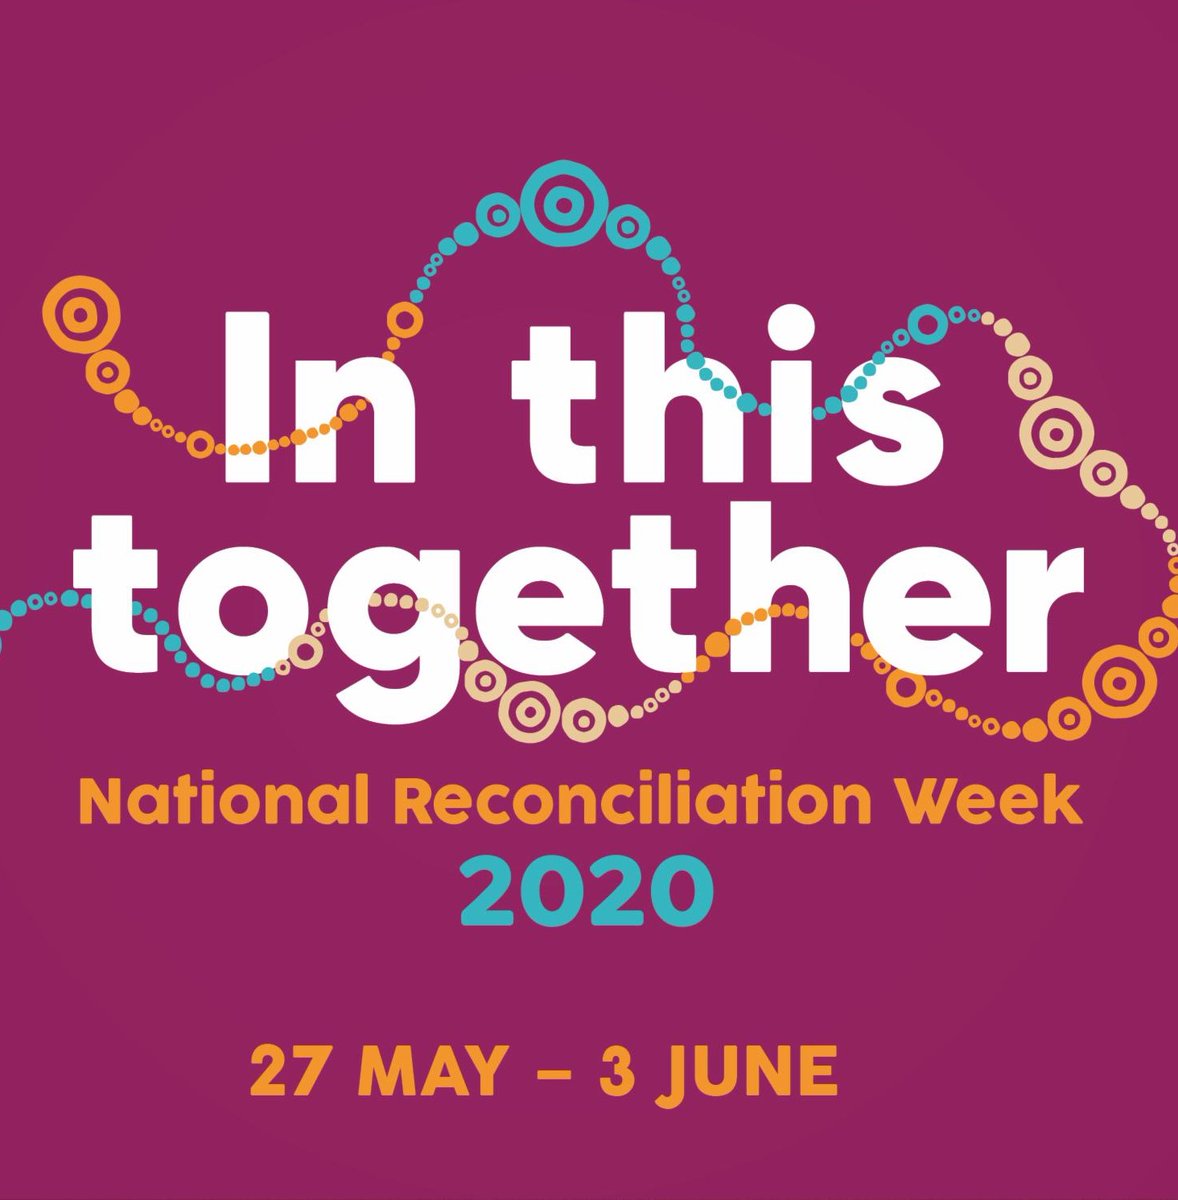 Twenty years ago, I walked across the Harbour Bridge to mark the first National Reconciliation Week. Twenty years later, we still need to be “In This Together” to achieve meaningful reconciliation. #InThisTogether #NRW2020